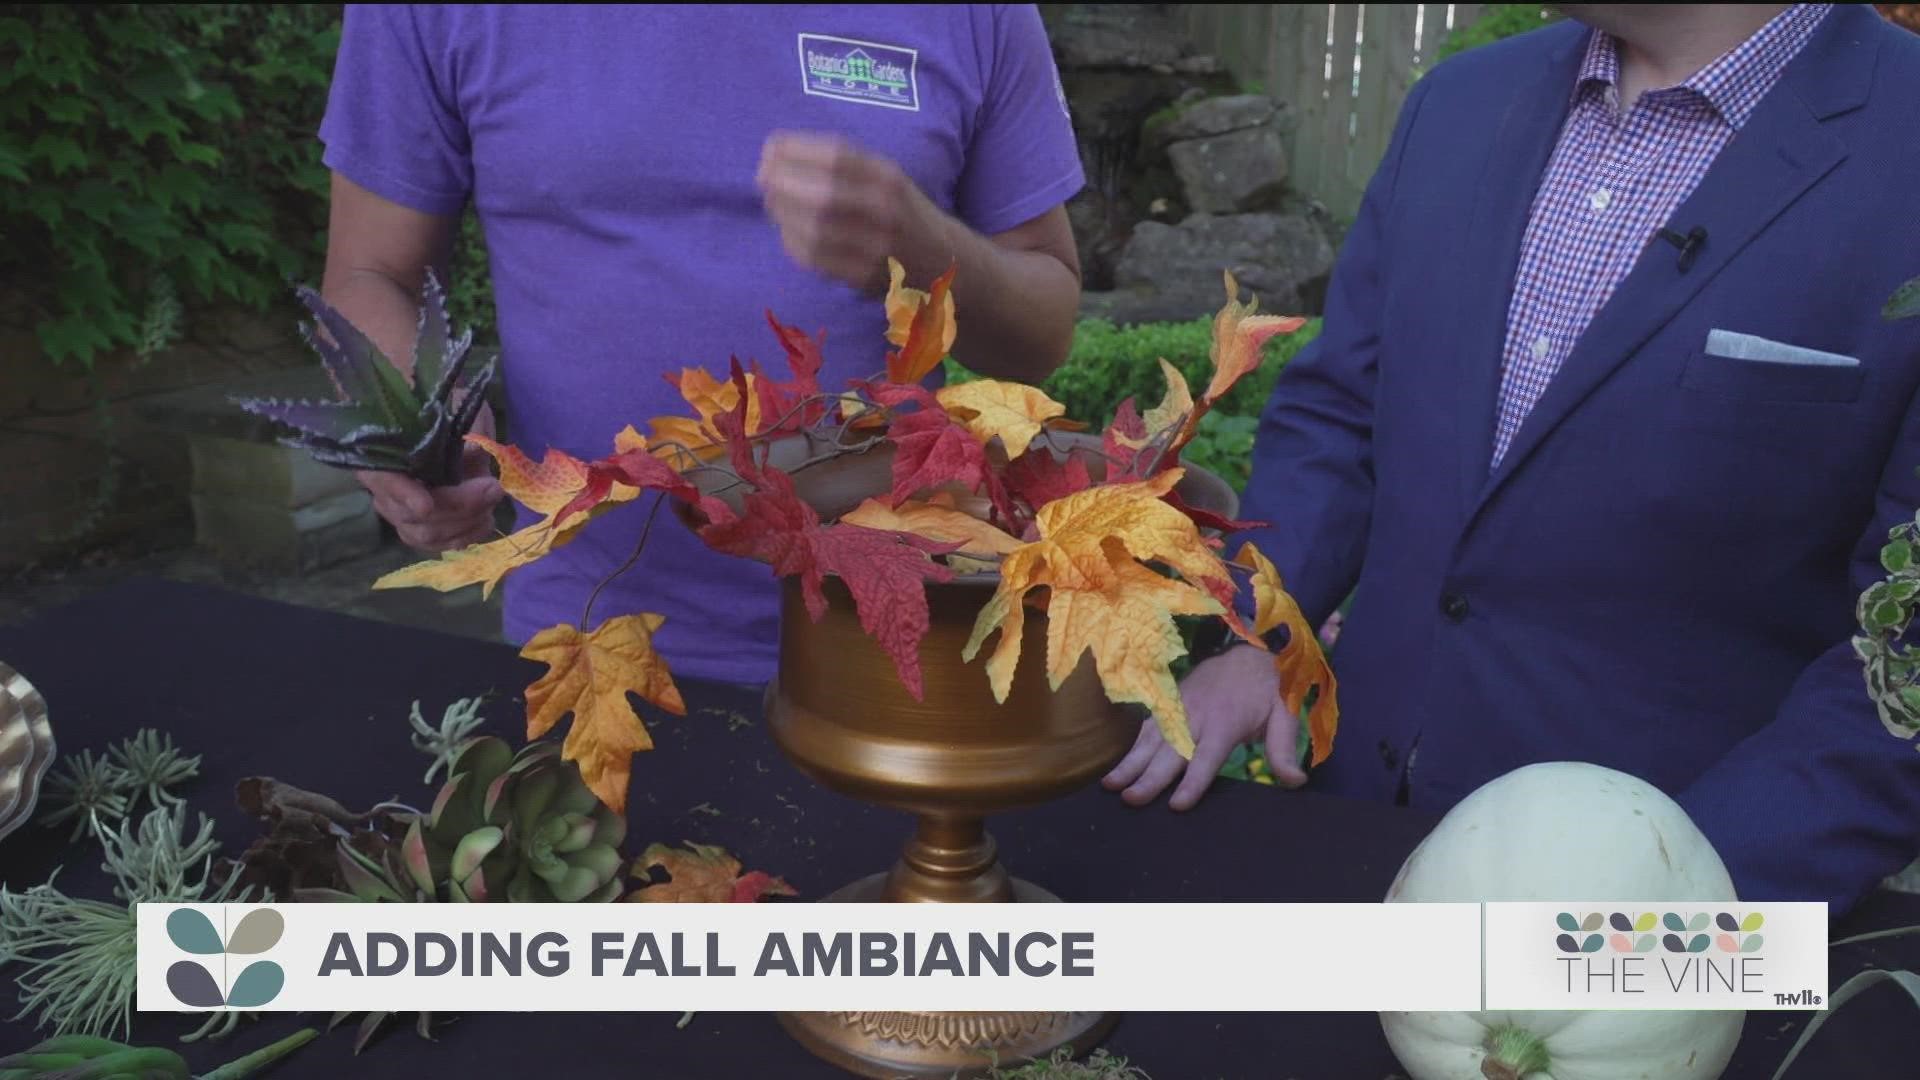 Chris H Olsen is here to show us how to add Autumn color and texture to our home!